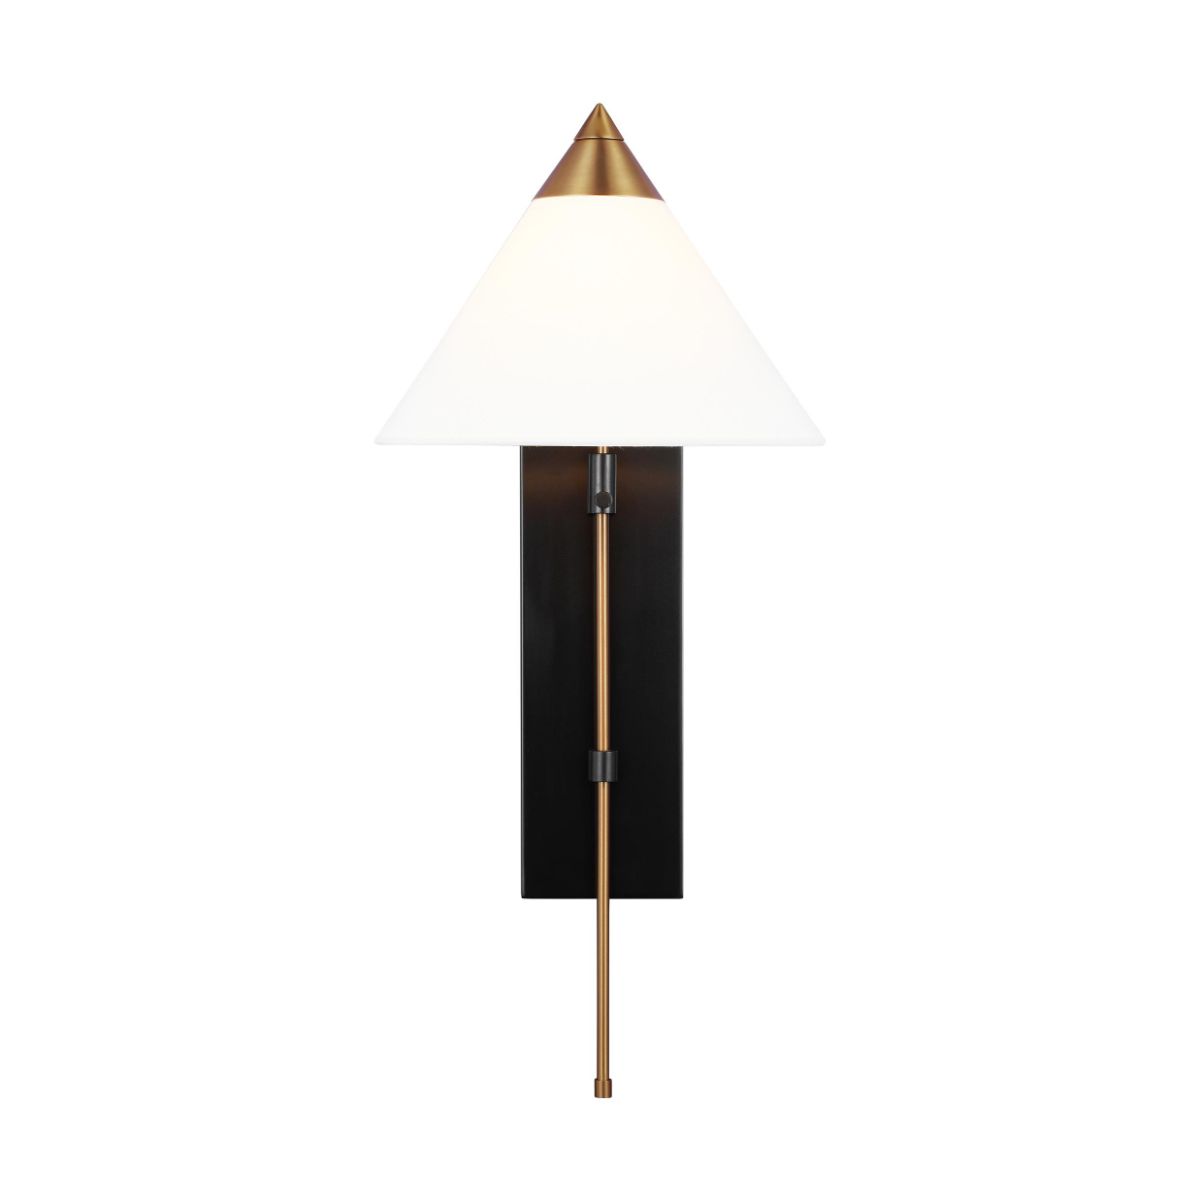 Franklin 26 in. Armed Sconce Burnished Brass and Deep Bronze finish